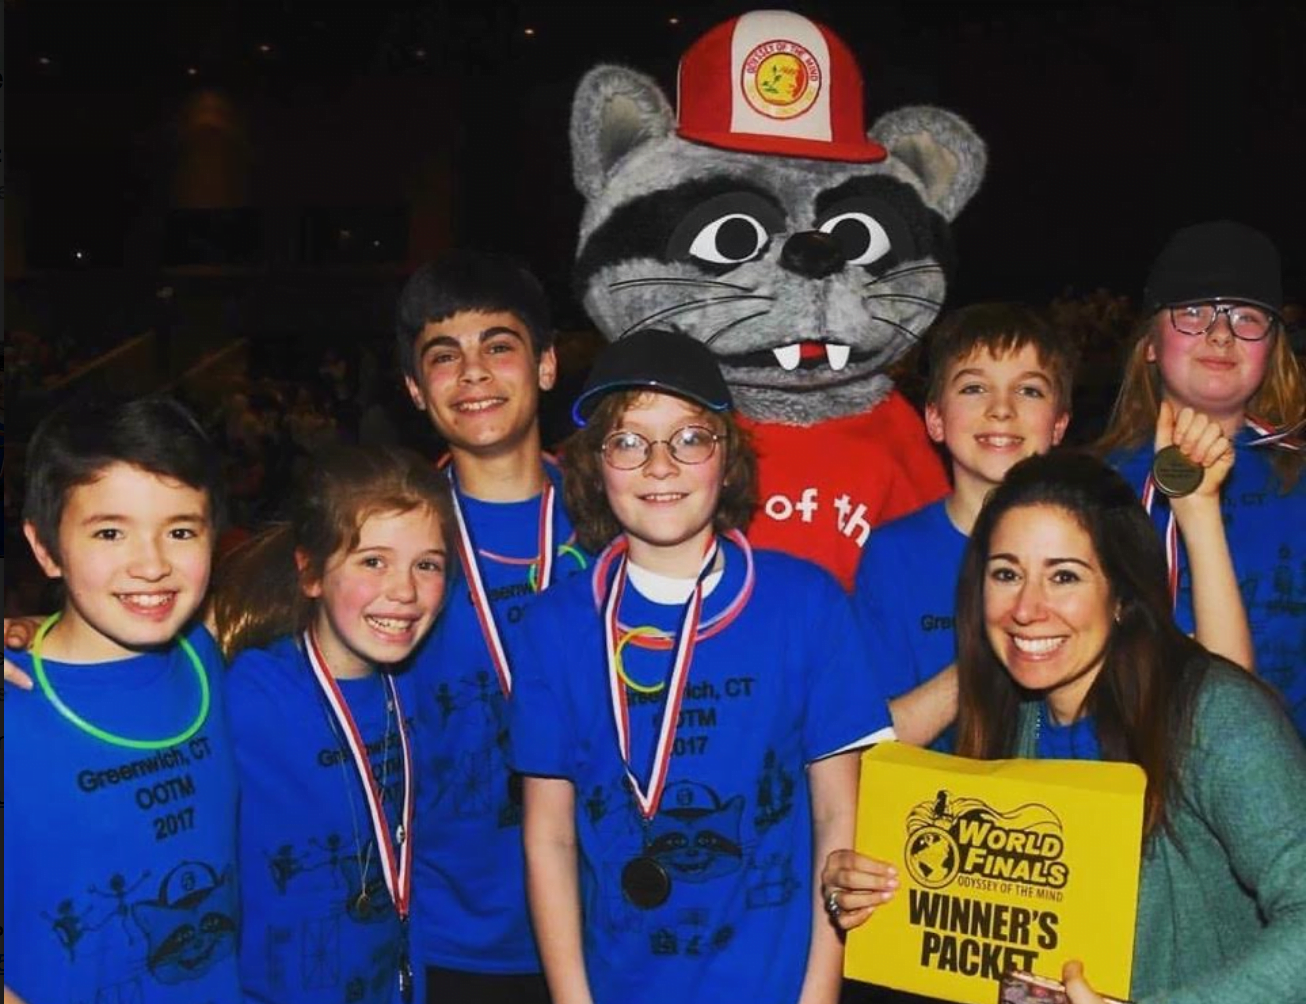 CMS Odyssey of the Mind Team Win Big, Head to Michigan in May for World